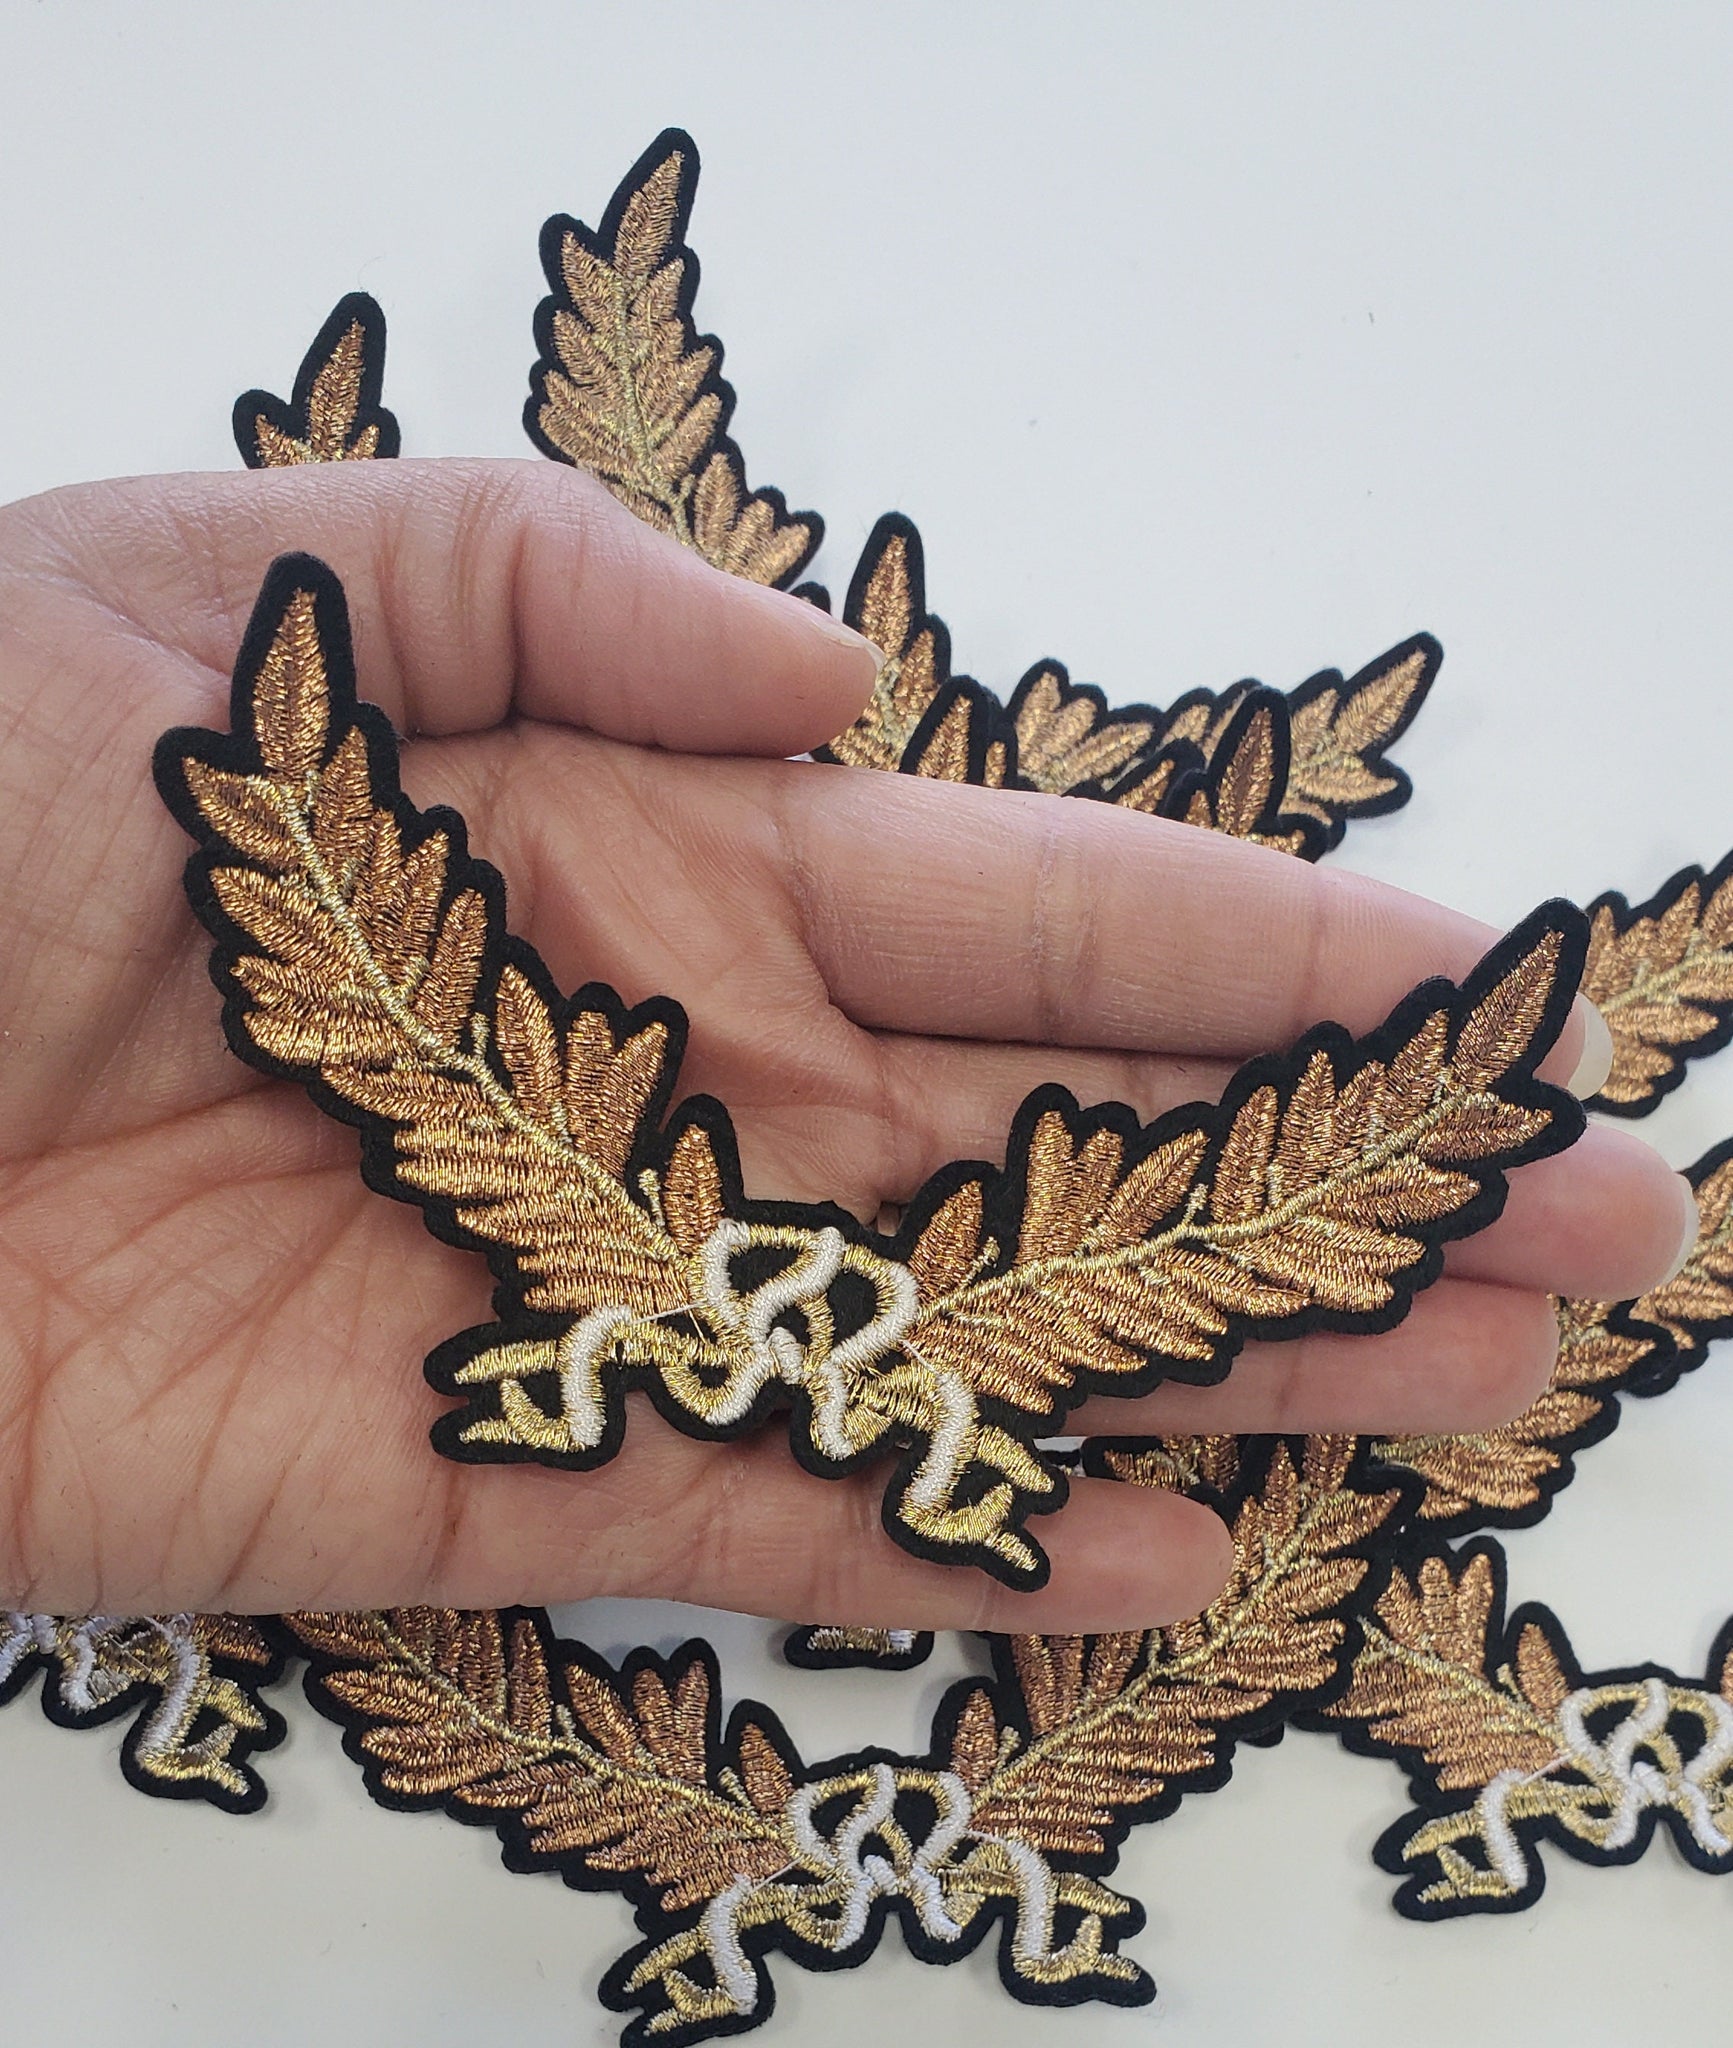 NEW, Feathered Wing Royalty Crest, Gold Metallic, Copper, and Black Emblem patch, DIY, Embroidered Applique Iron On Patch, Size 6"